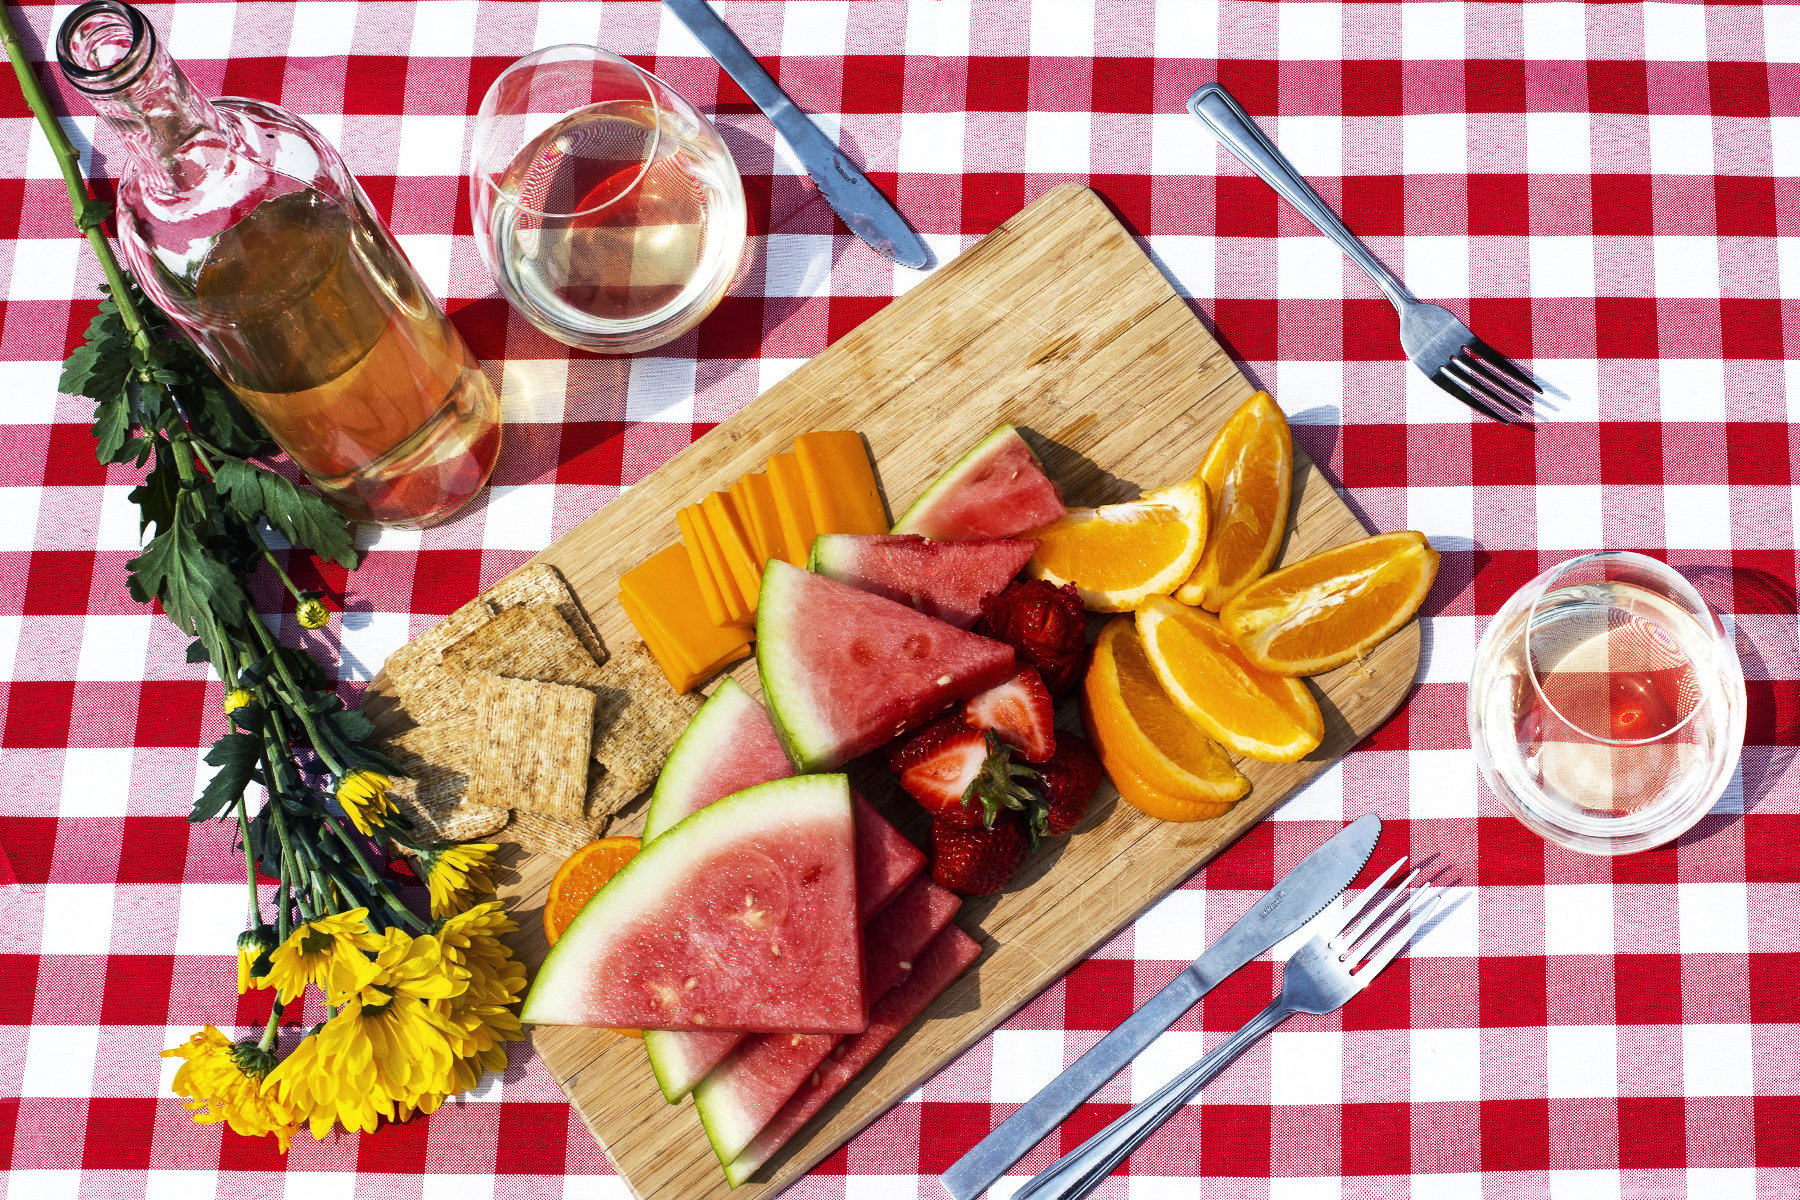 Overhead shot of cutting board with fruits, cheese and crackers on picnic blanket